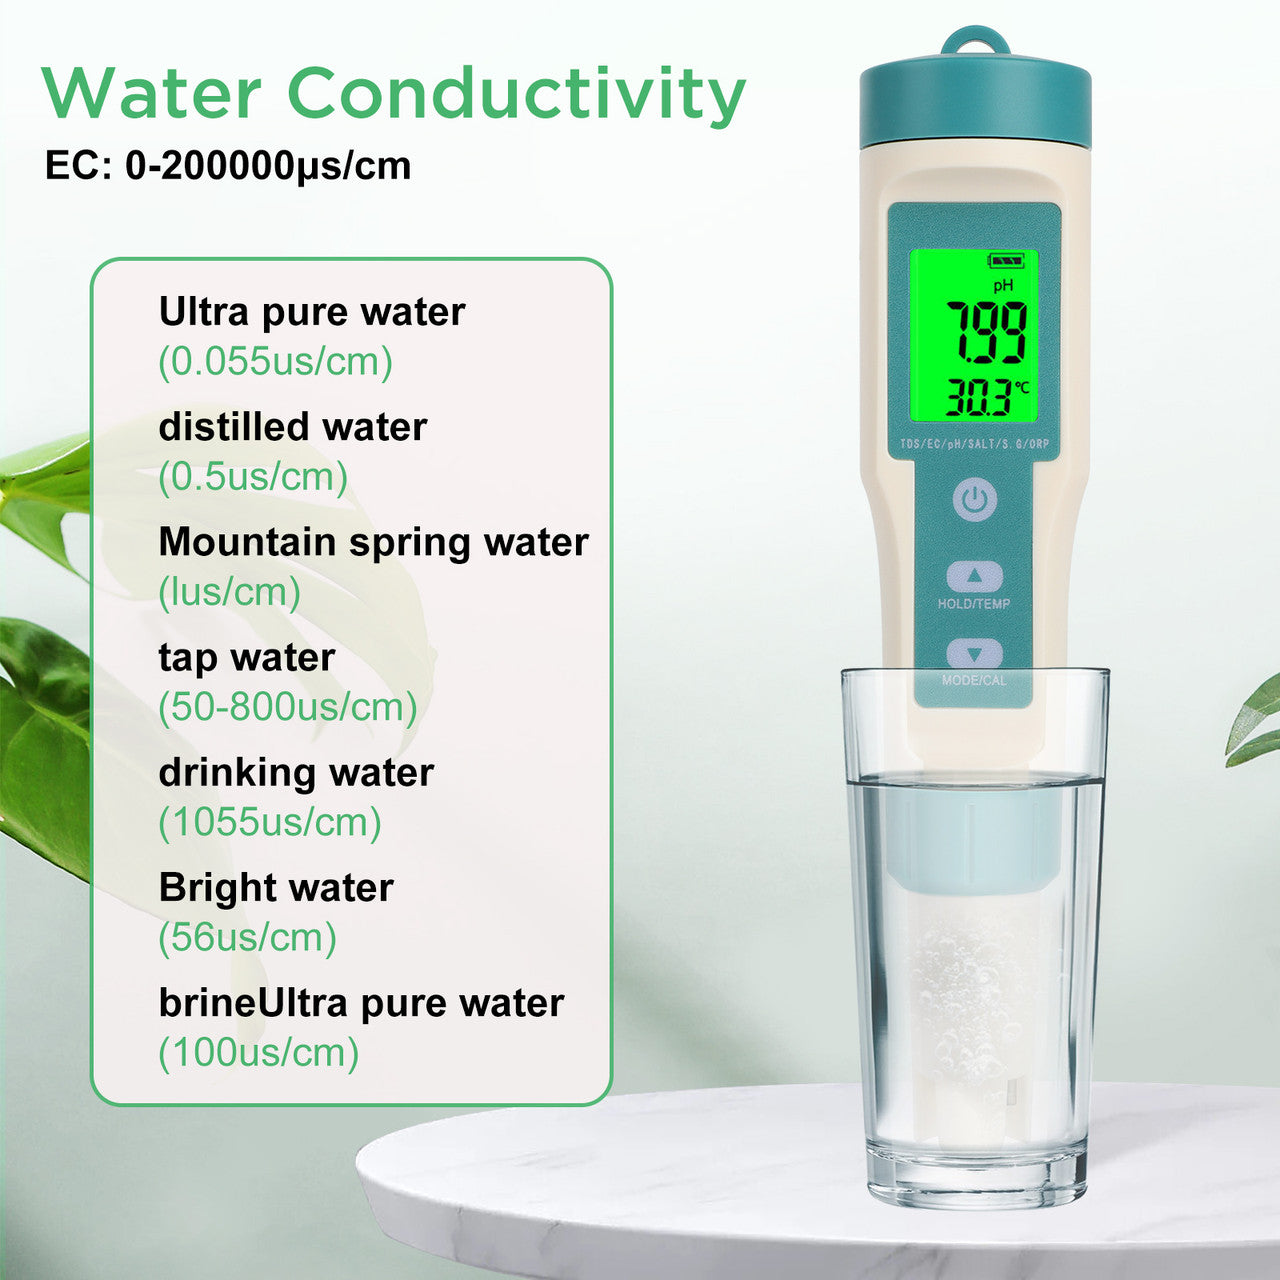 7-in-1 Water Quality Test Pen - Tester Measures Water by PH TDS EC ORP S.G Water Salinity Temp